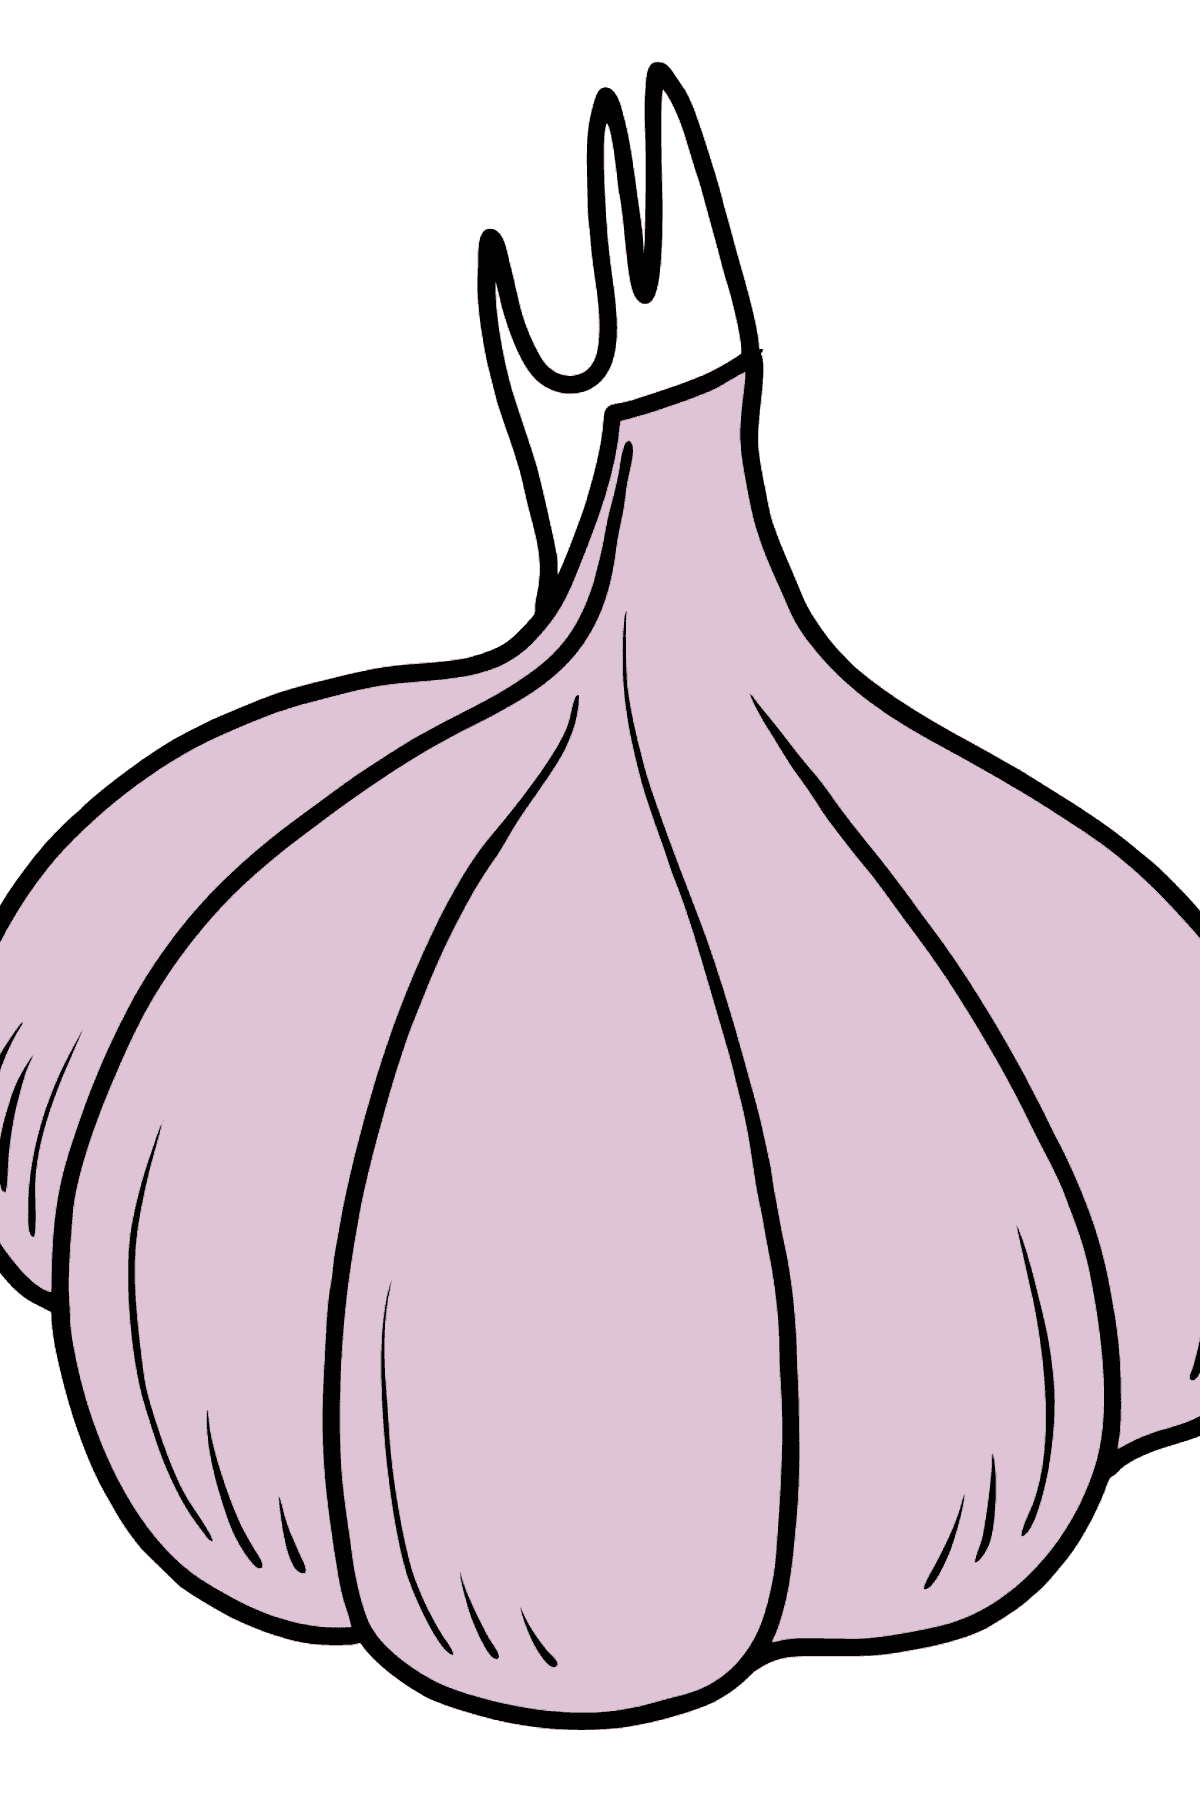 Garlic coloring page - Coloring Pages for Kids